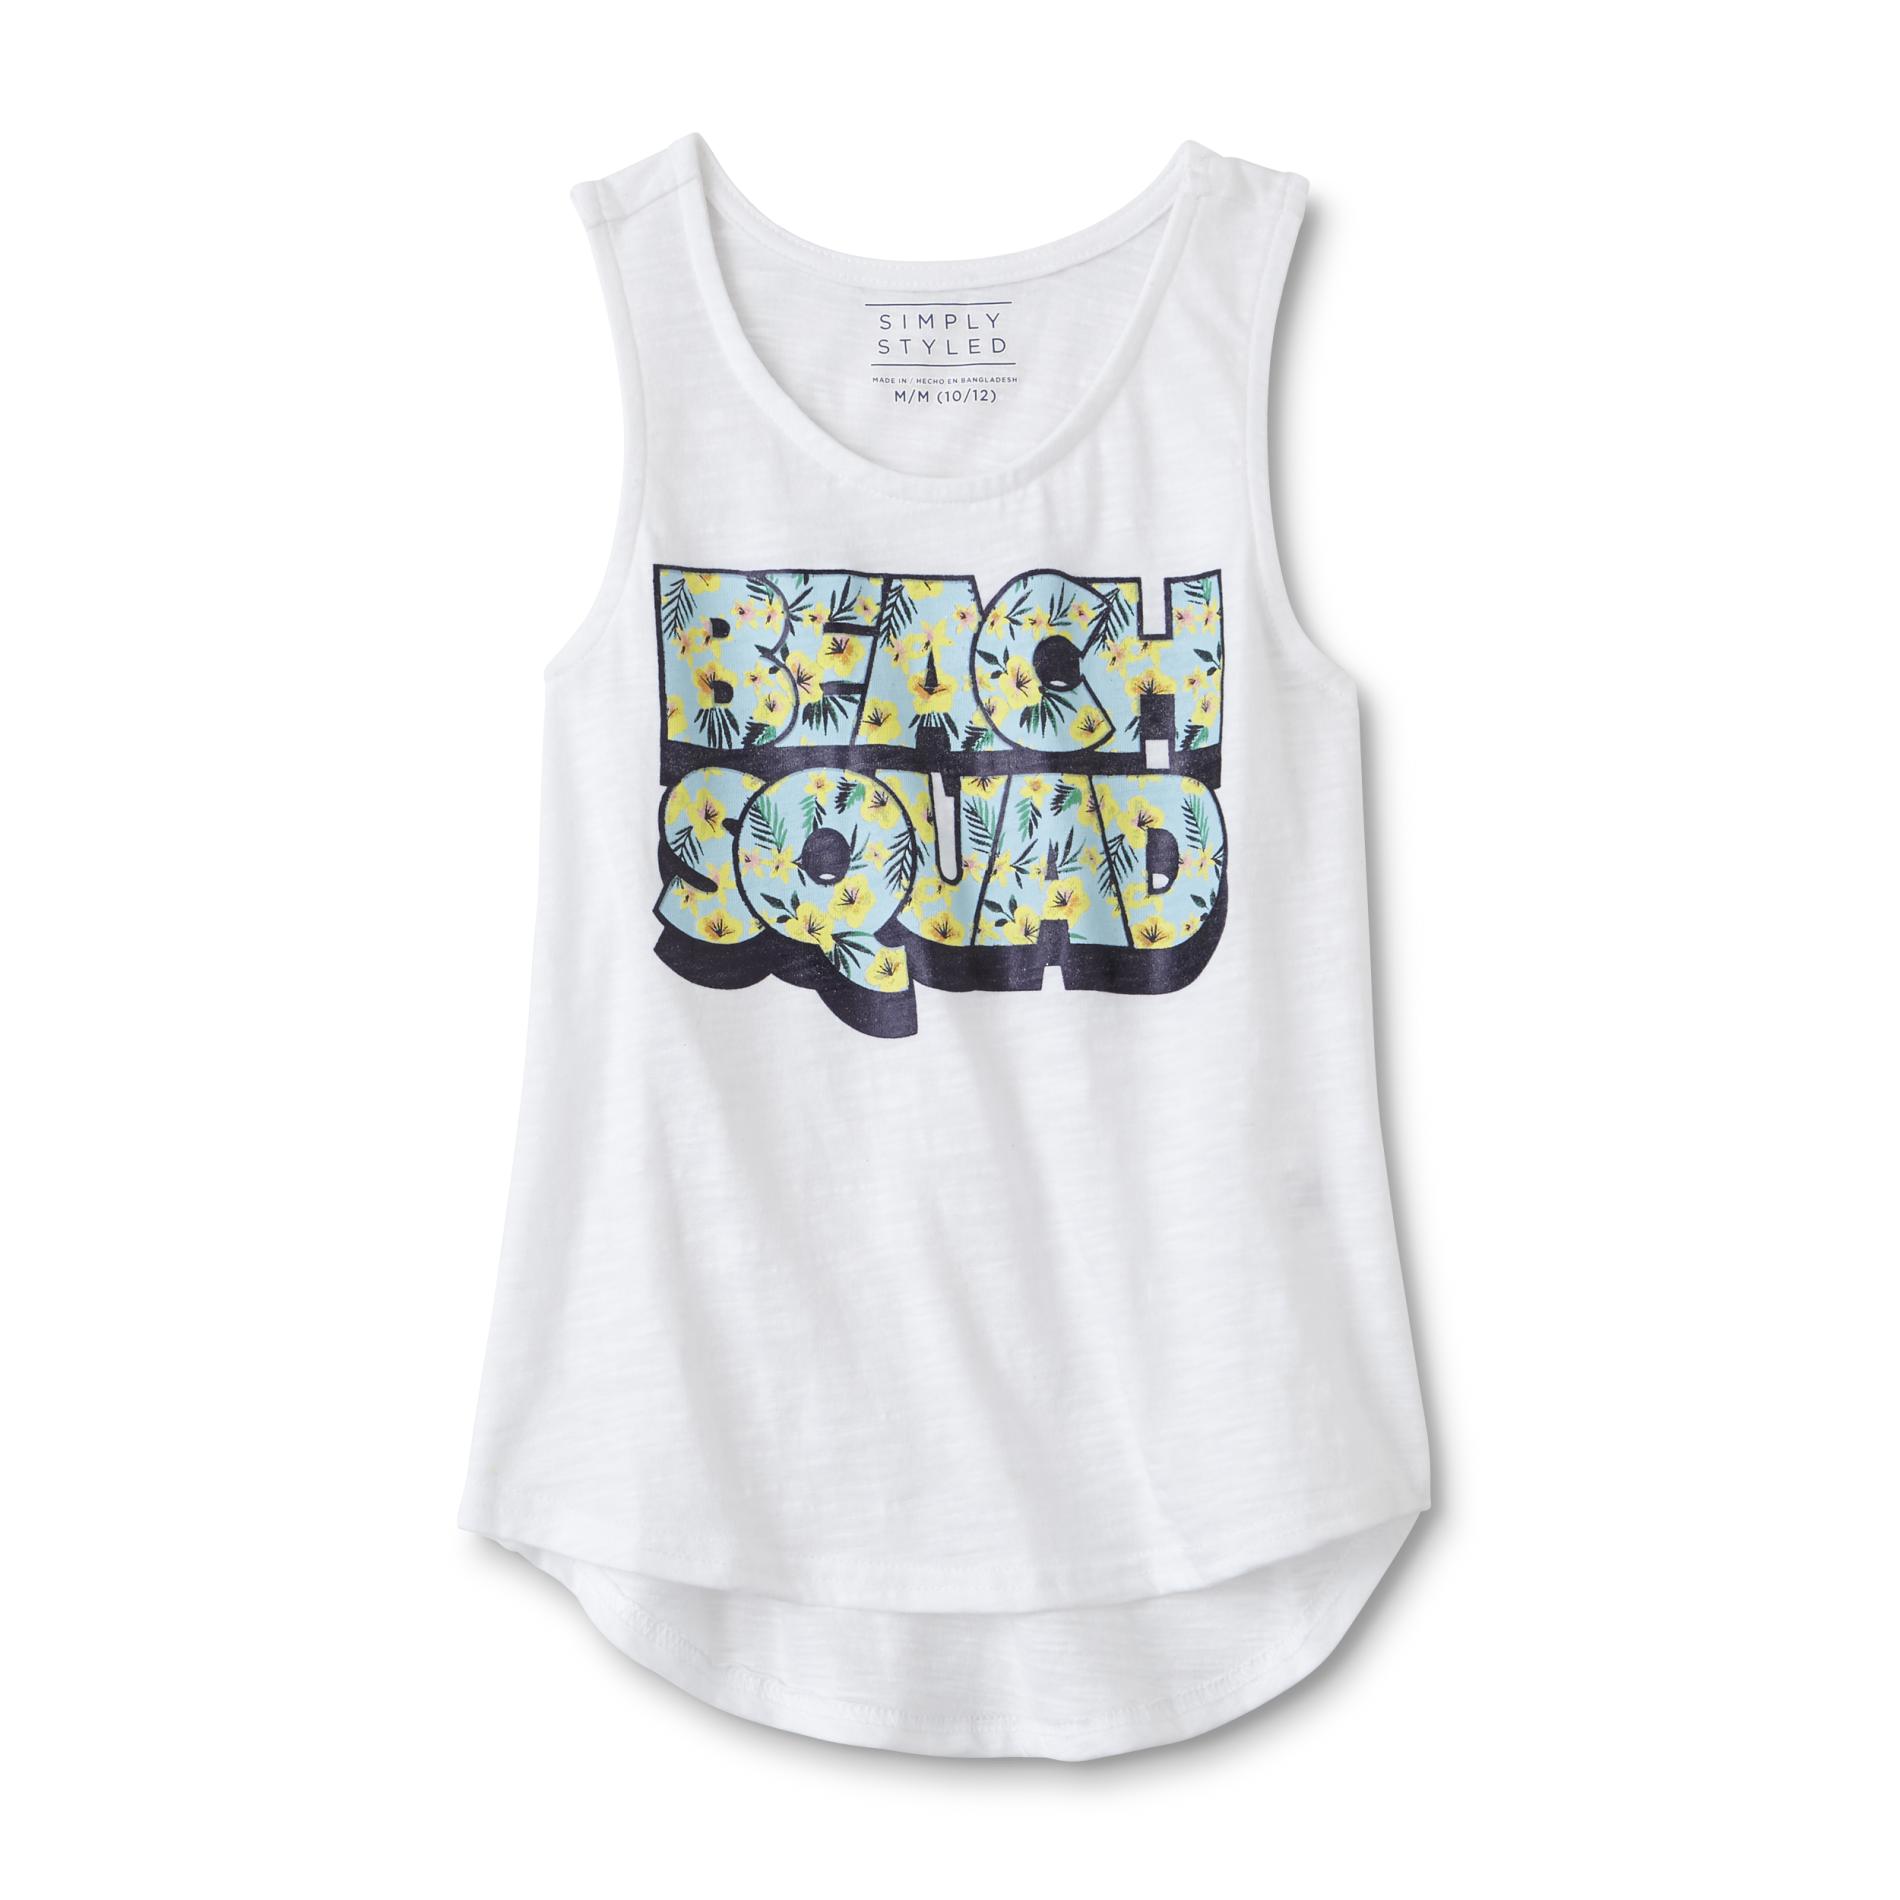 Simply Styled Girls' Graphic Tank Top - Beach Squad